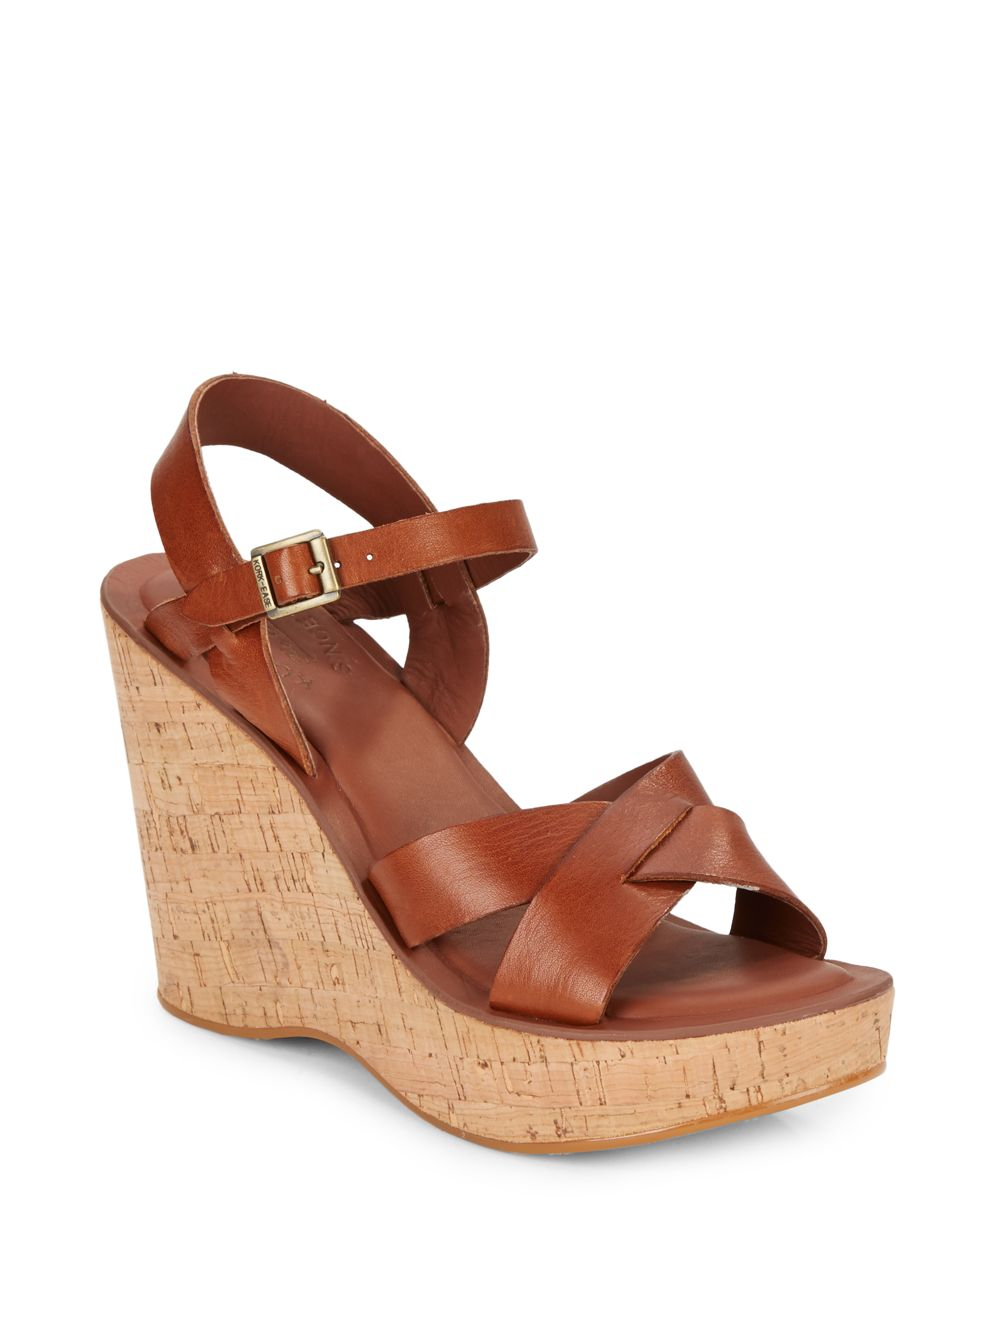 Kork-ease Bette Leather Cork Wedge Sandals in Brown | Lyst